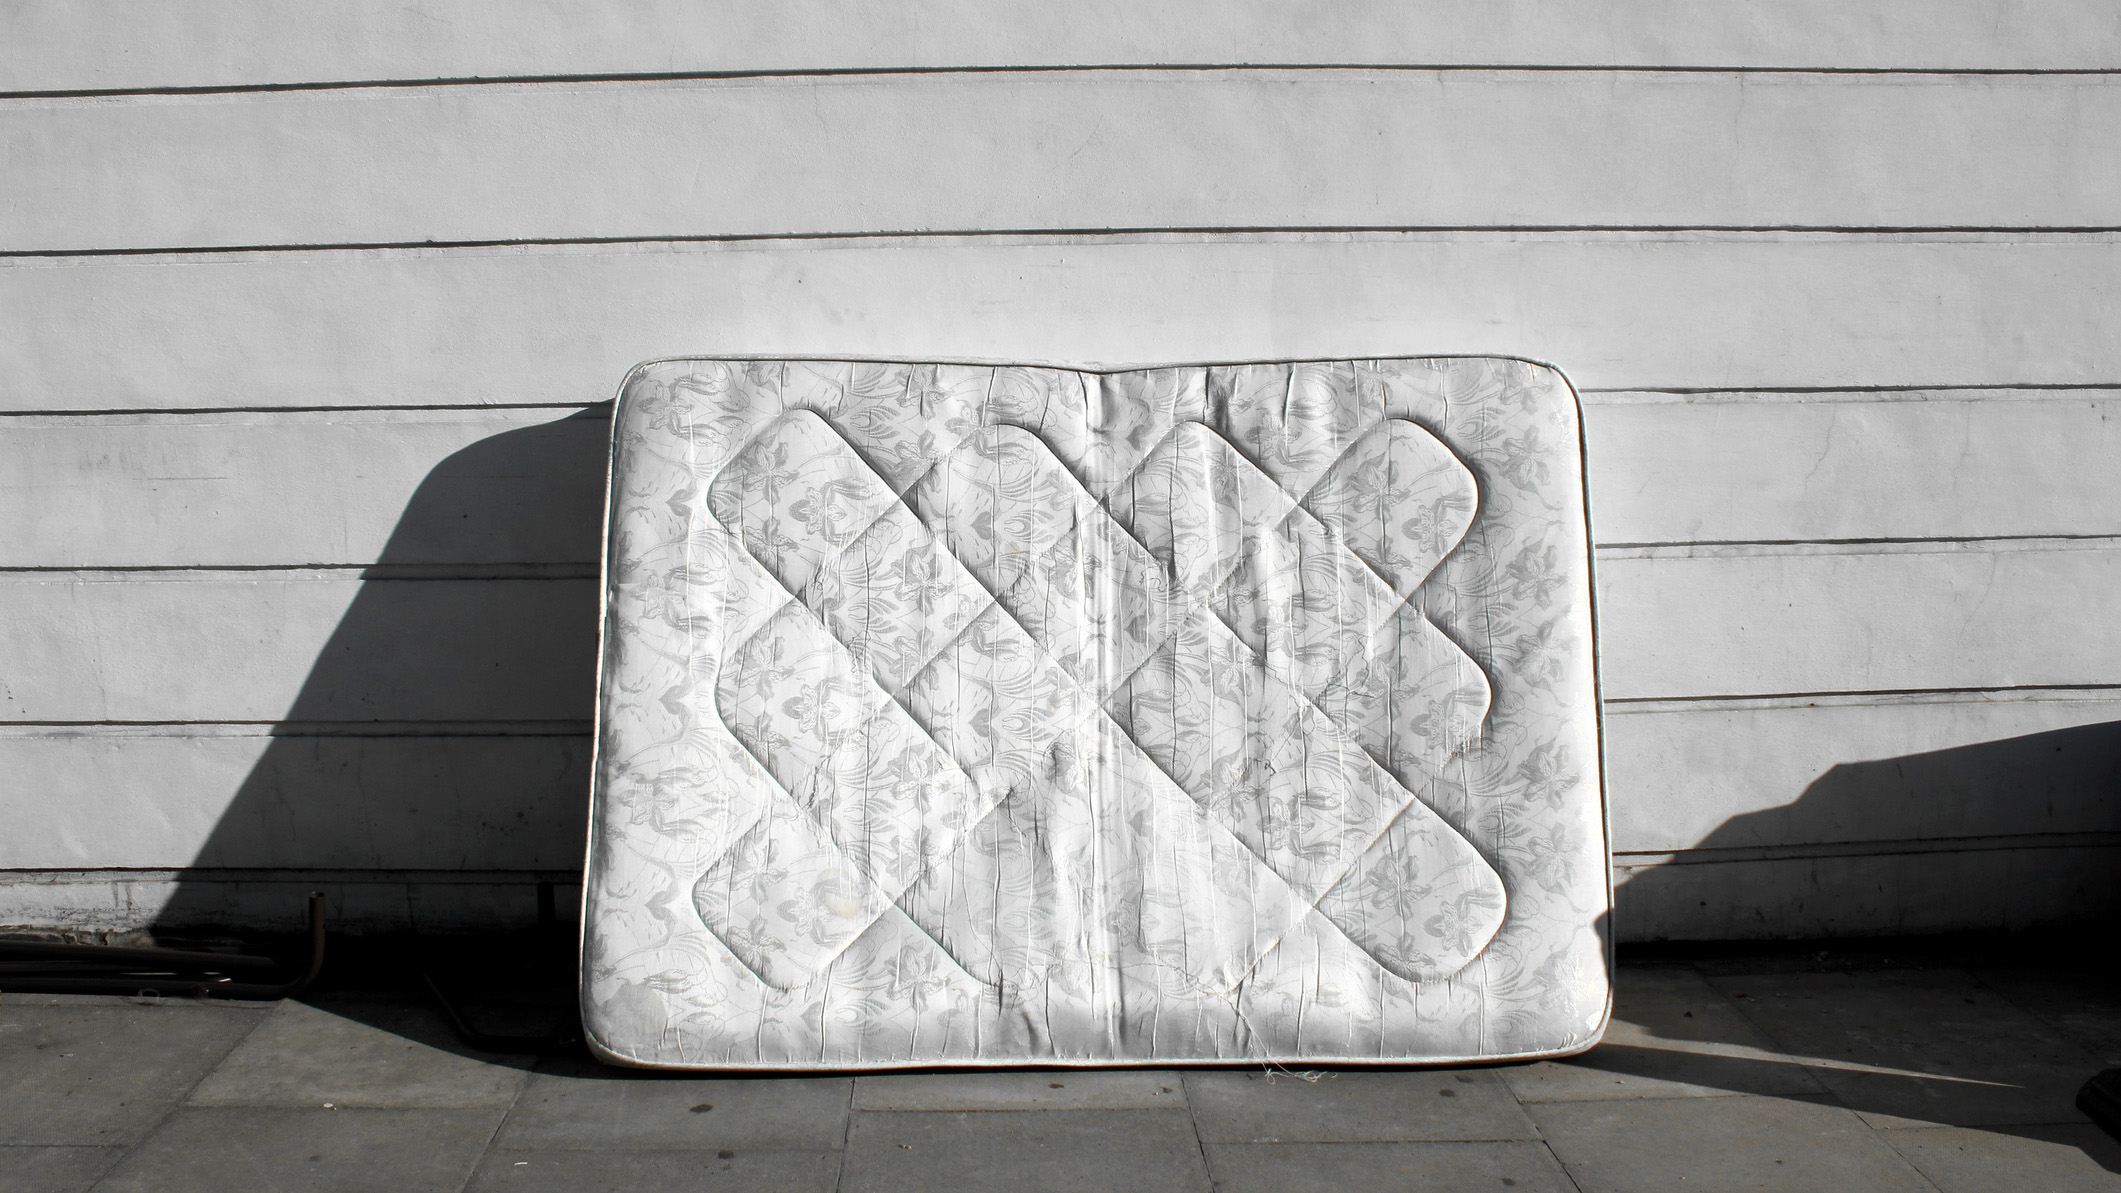 An old mattress leans against the side of a building